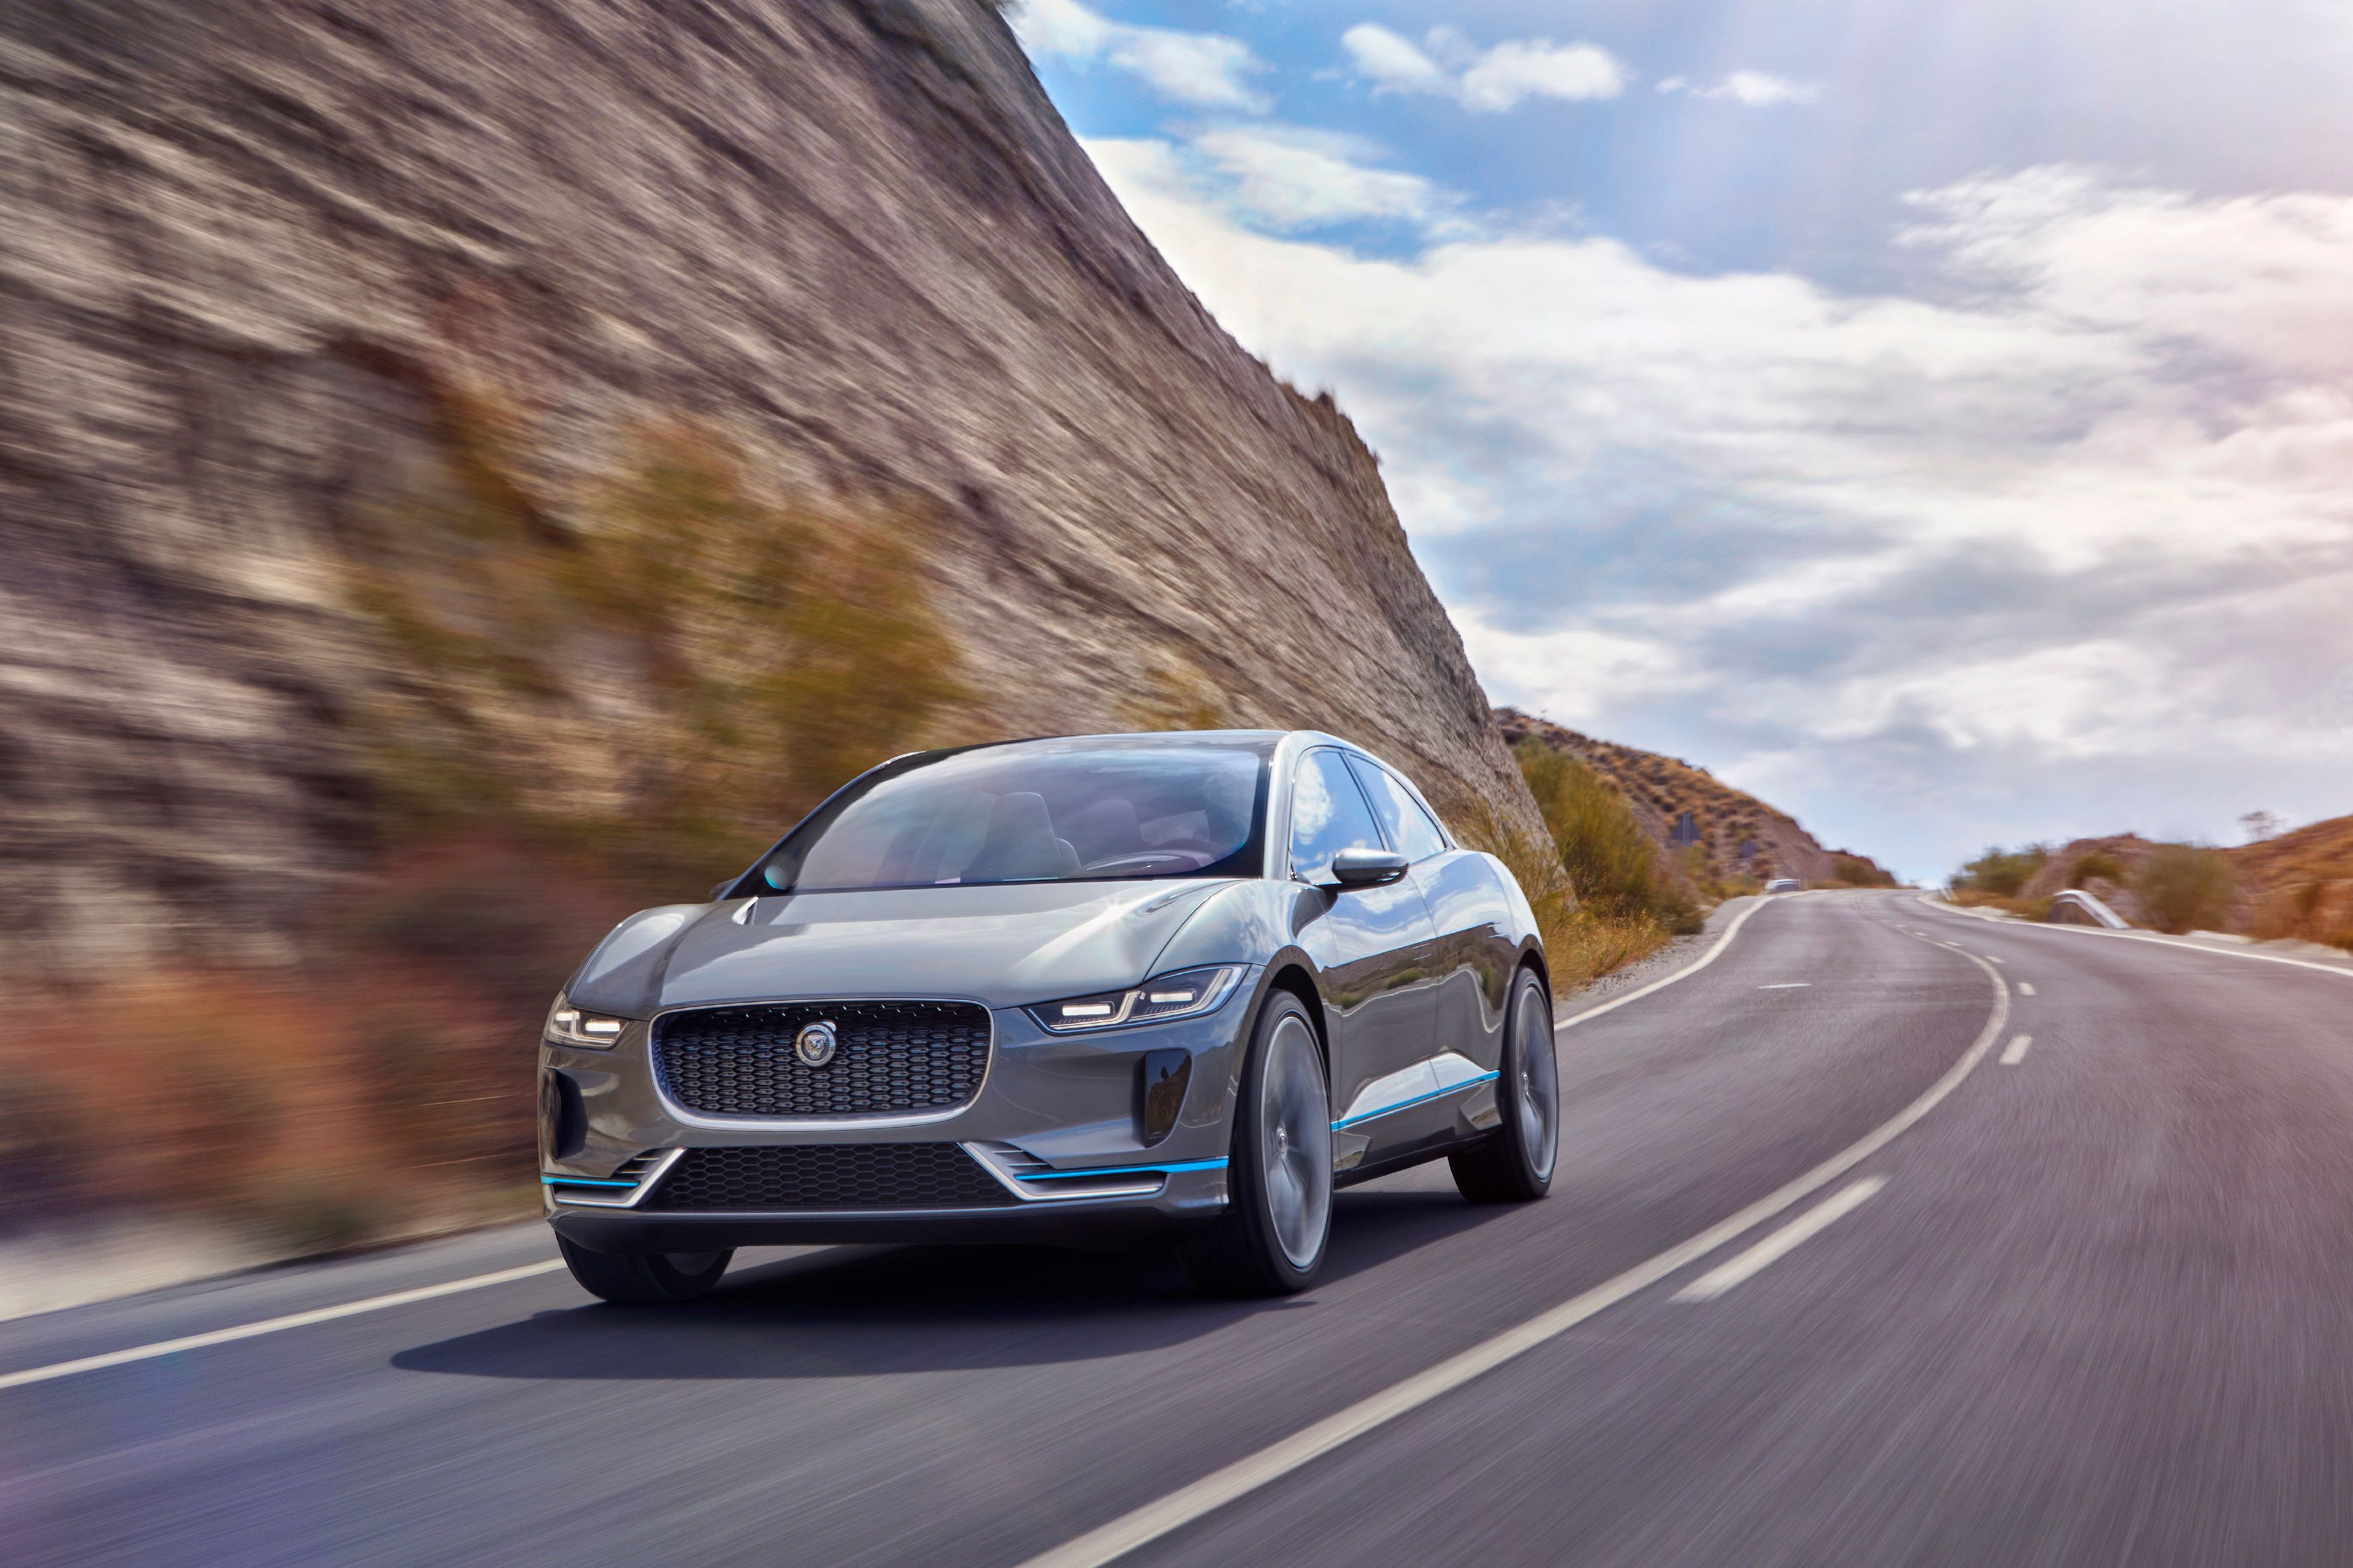 jaguar s first electric car is the i pace suv image 1